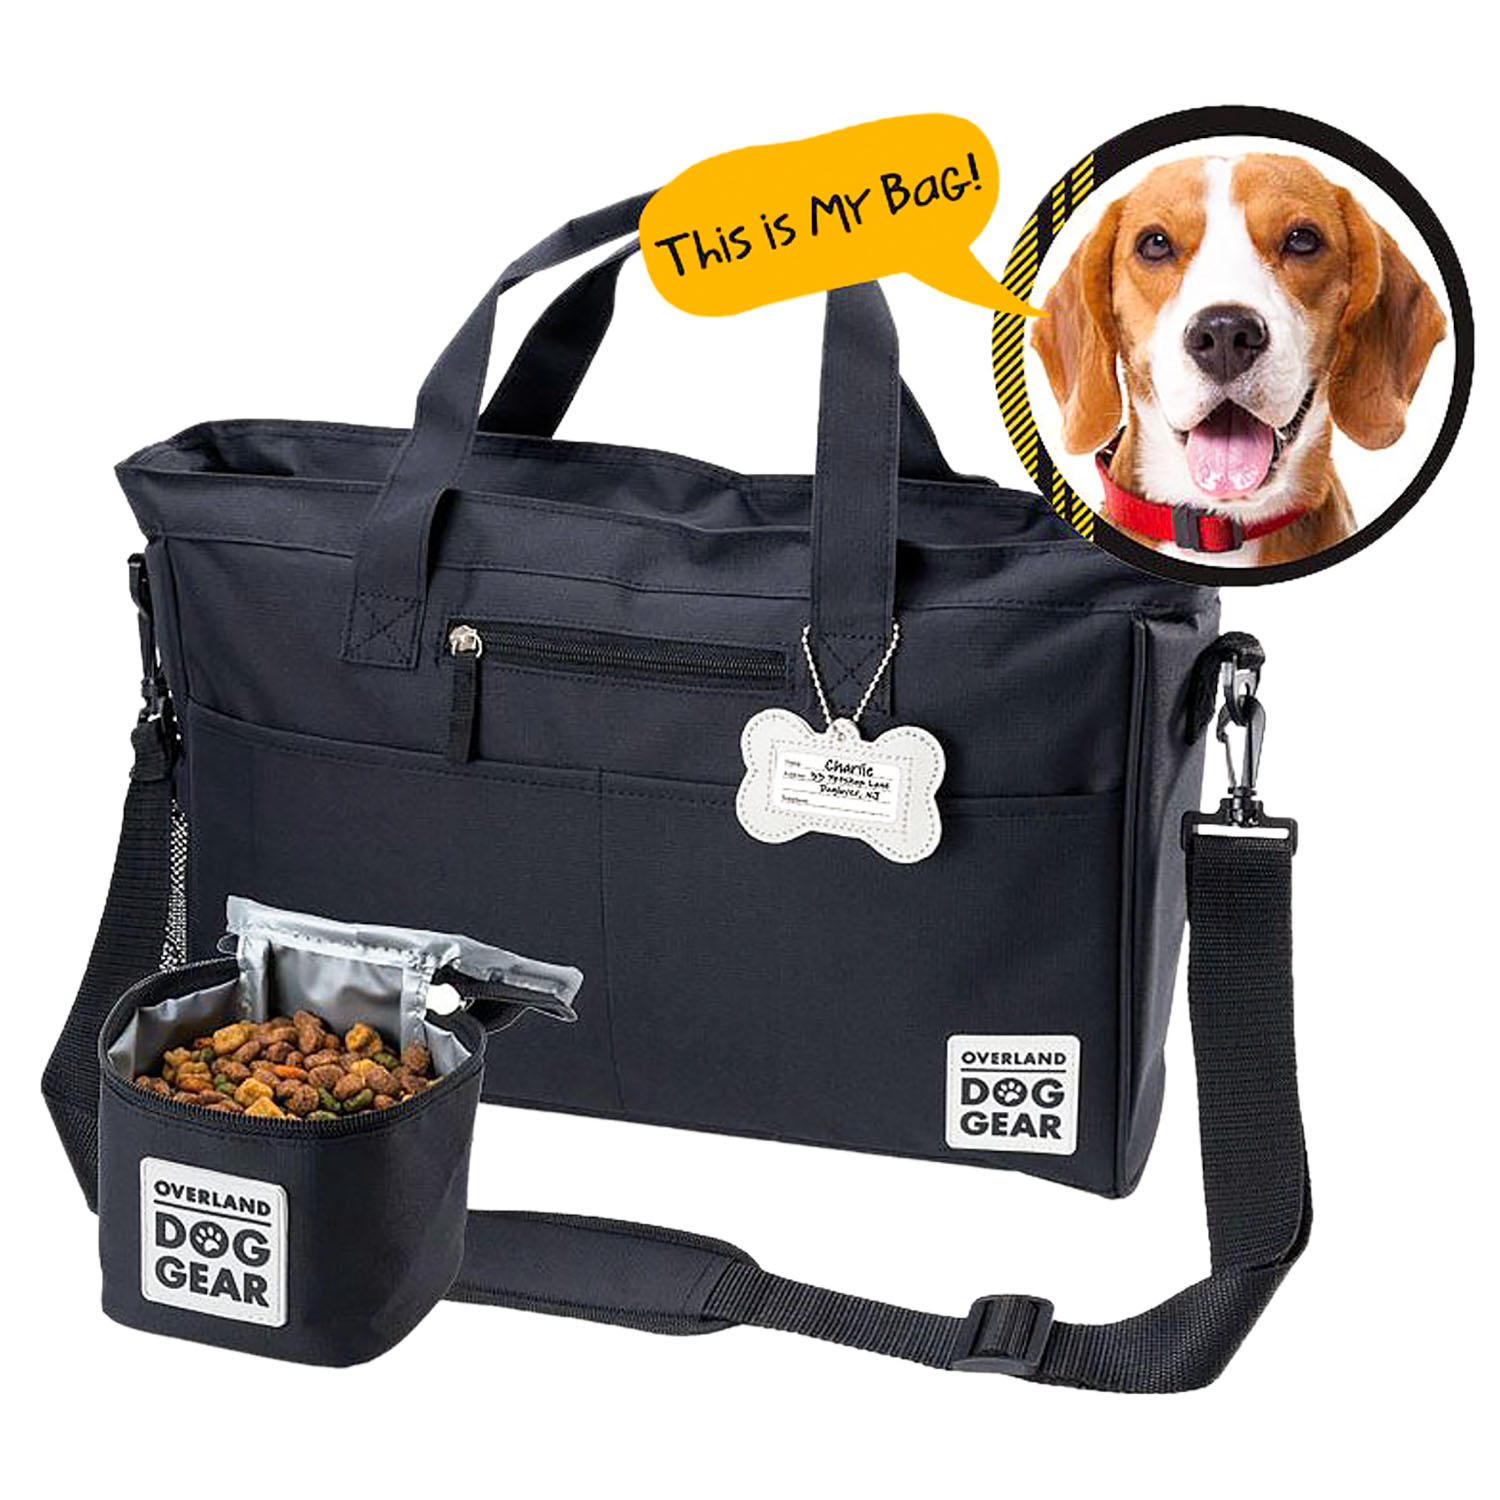 Mobile Dog Gear Day Away Tote with Lined Food Carrier, Black